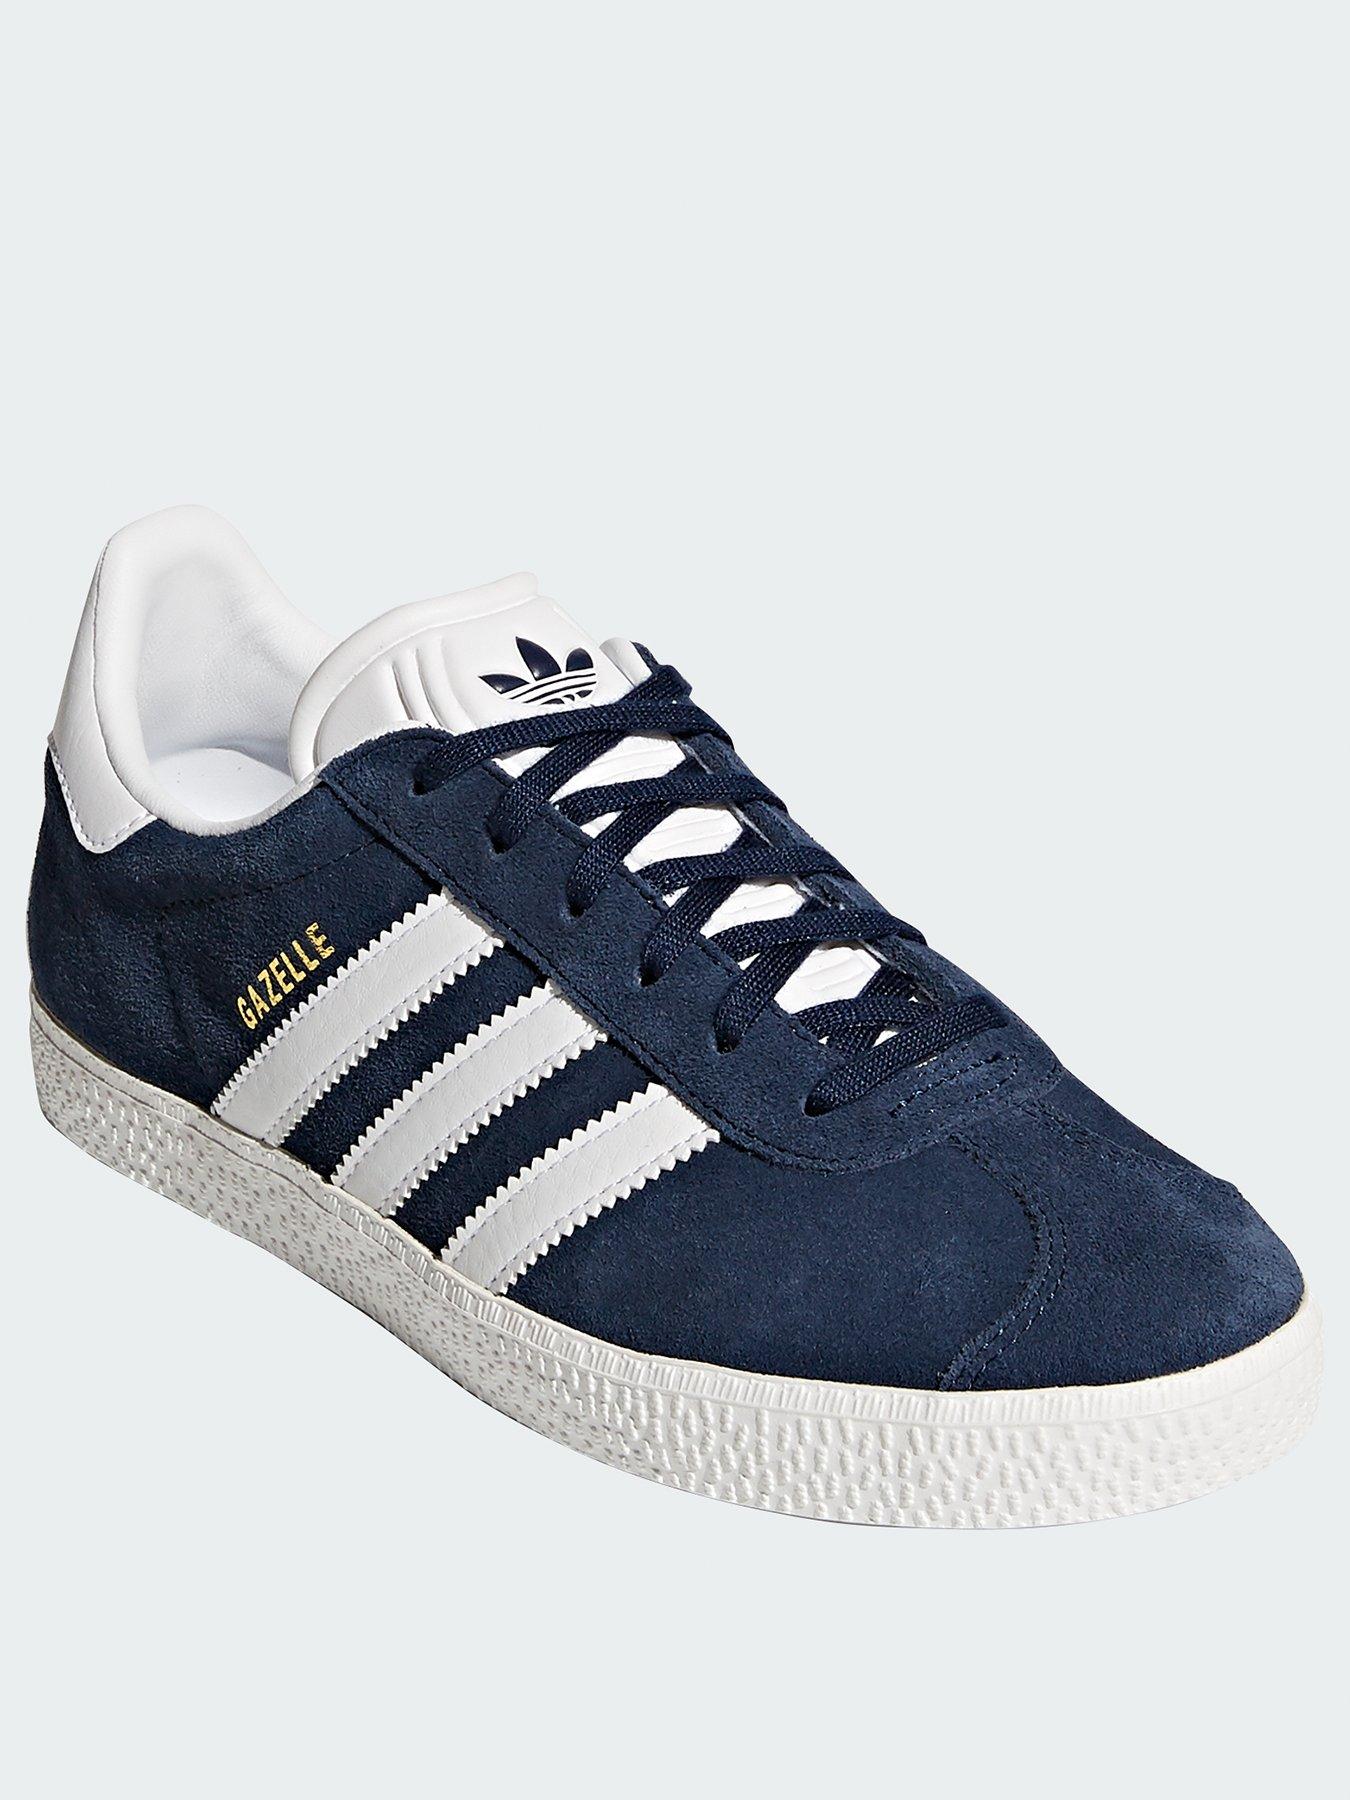 navy blue and white adidas